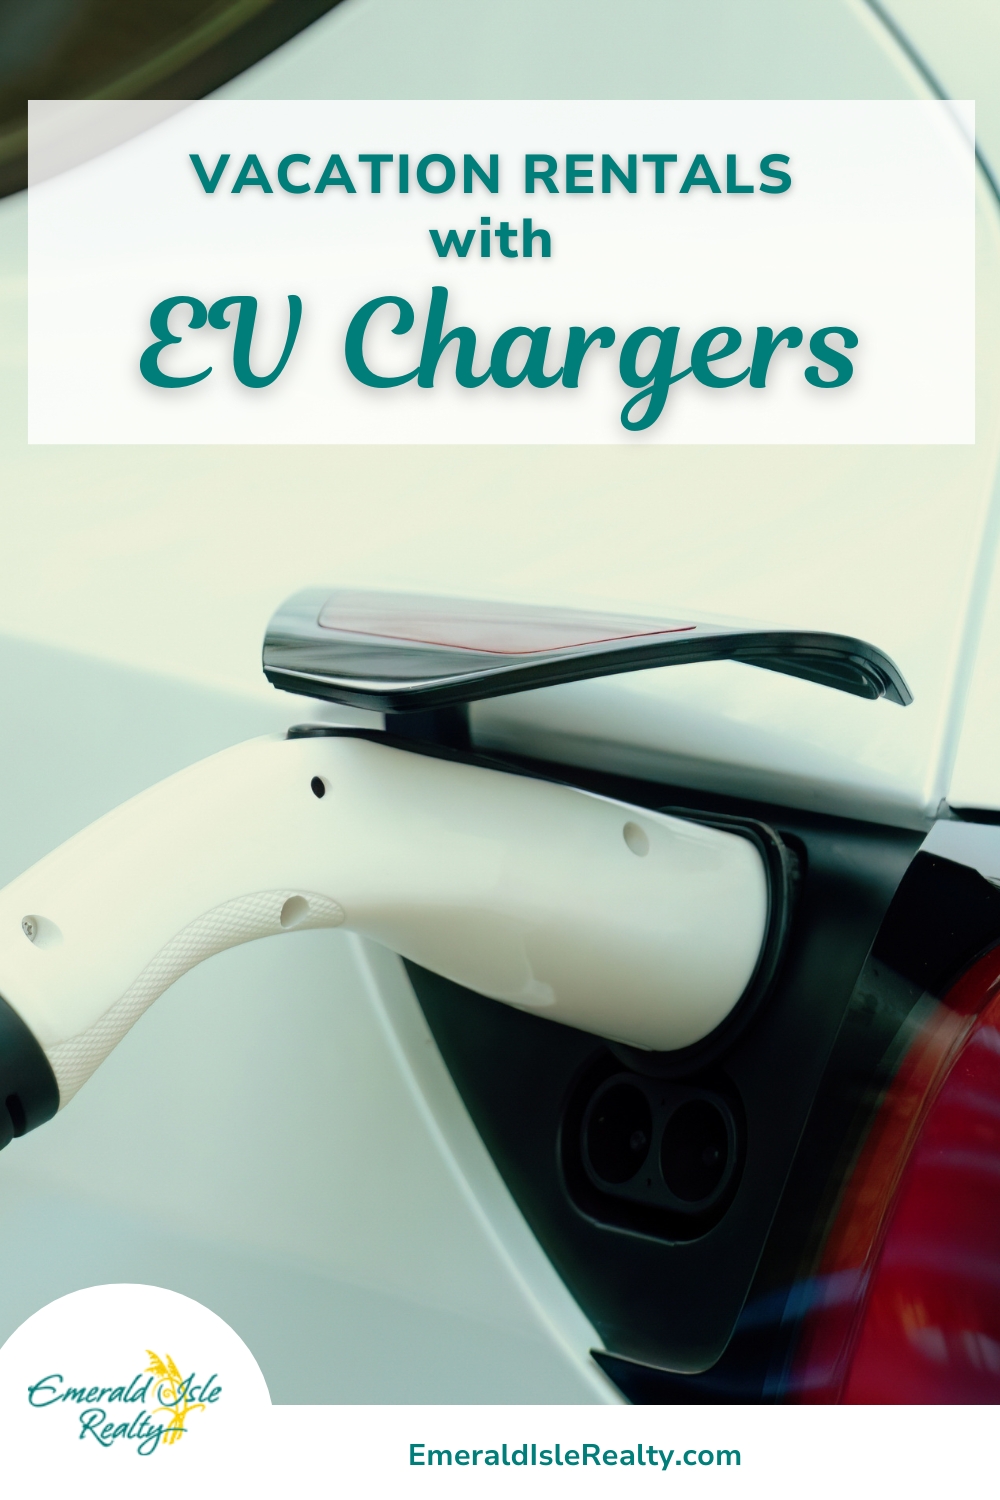 Vacation Rentals with EV Chargers in Emerald Isle, NC